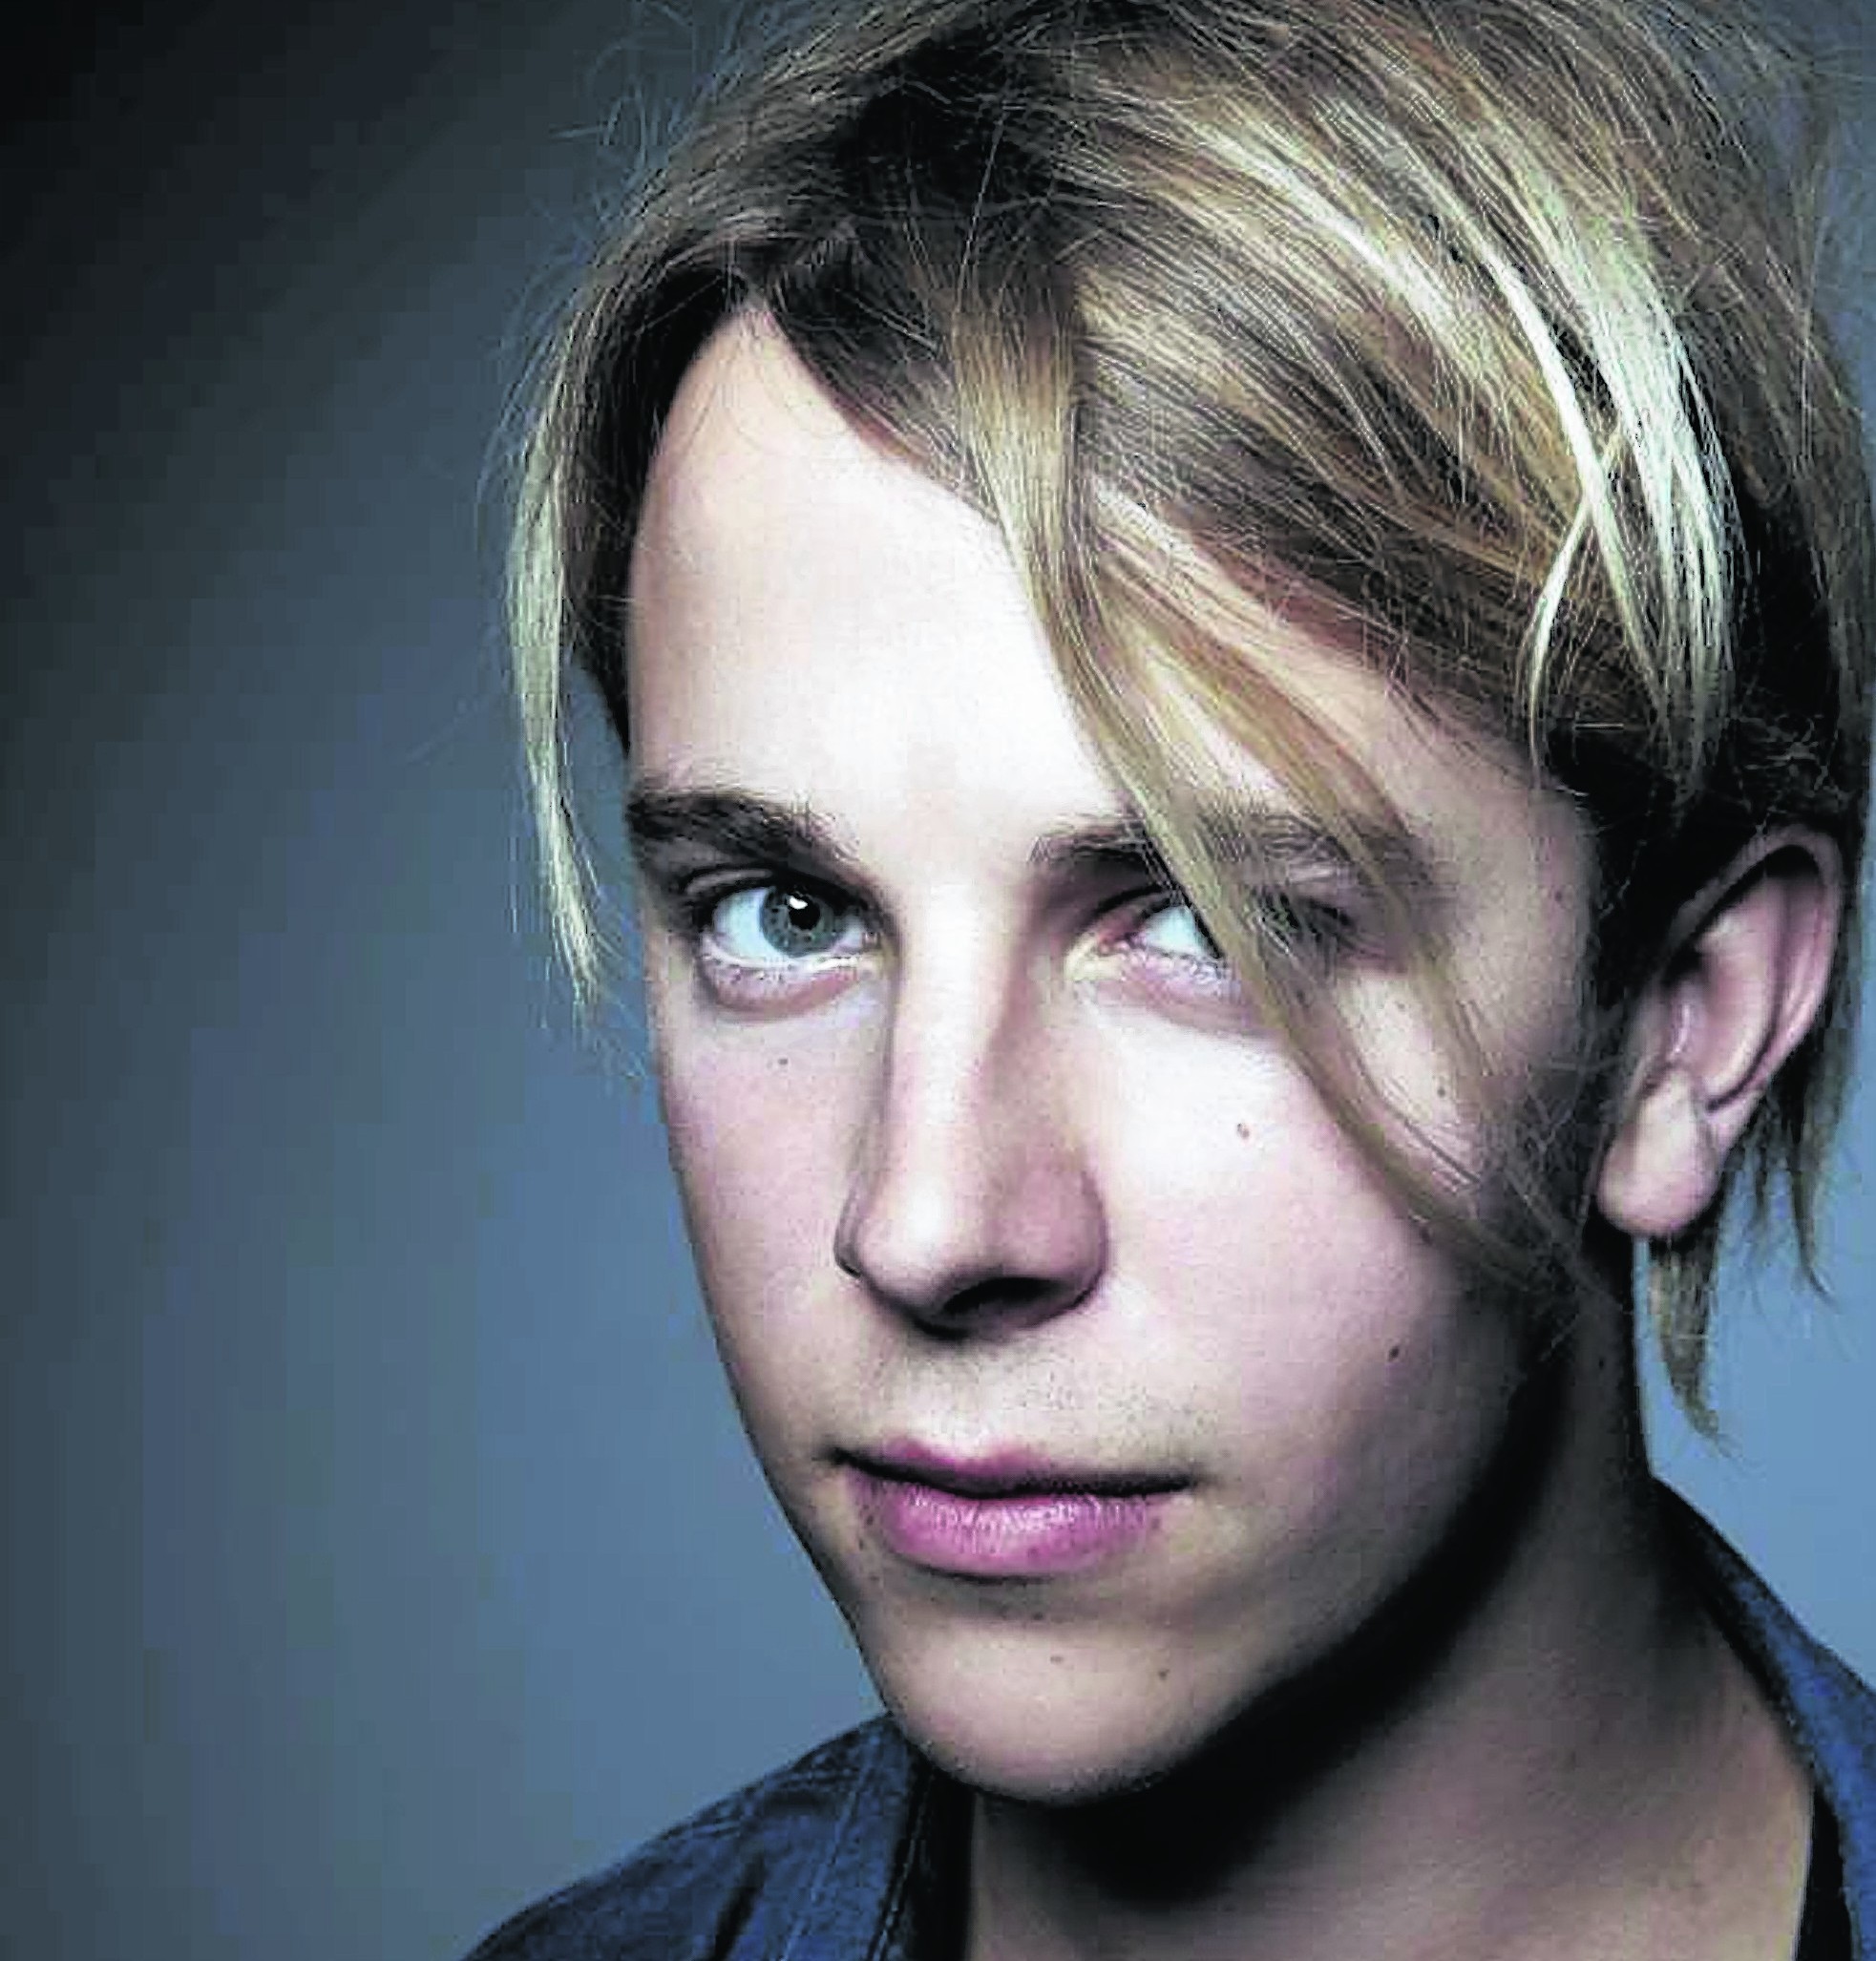 Tom Odell plays the Music Hall on September 26